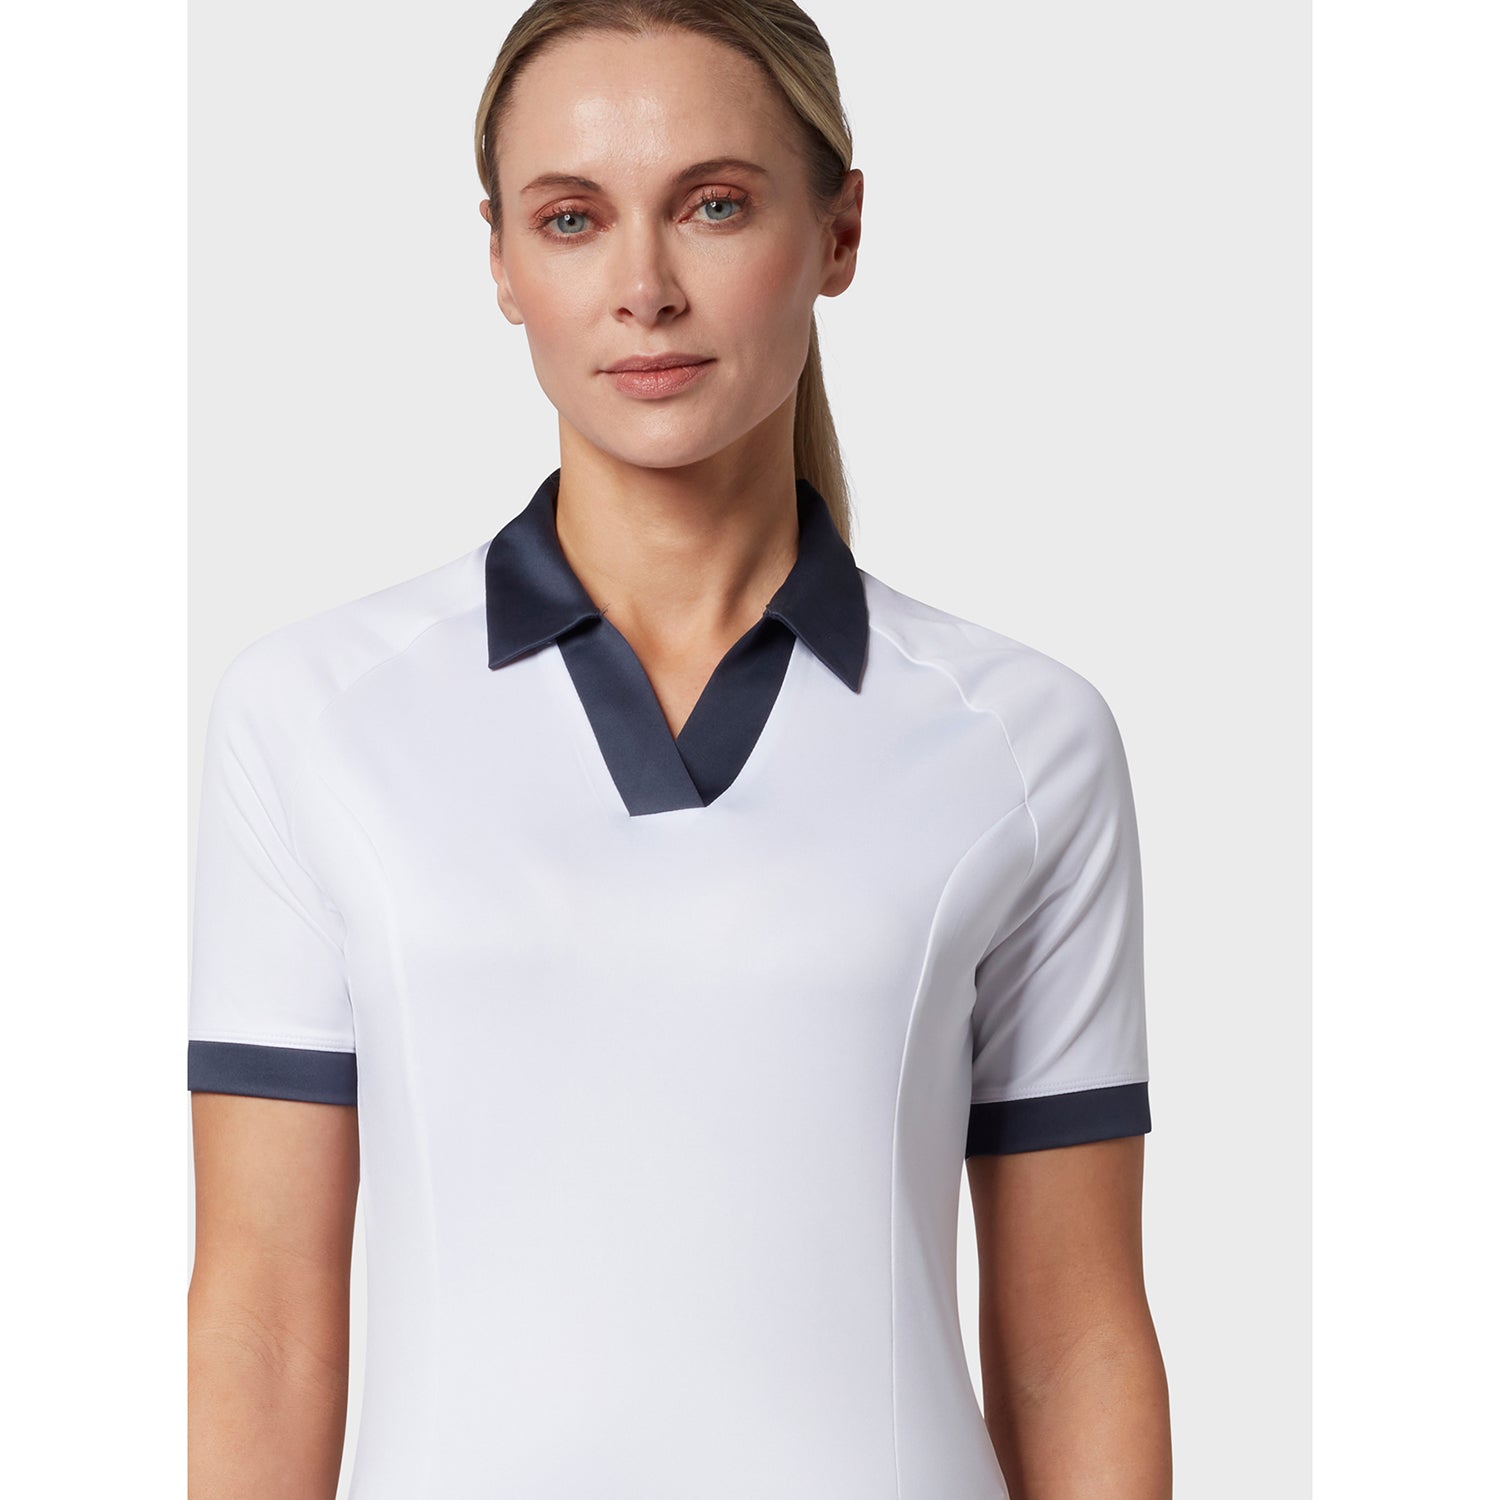 Callaway Ladies Short Sleeve Colour Block Polo Shirt in White & Navy